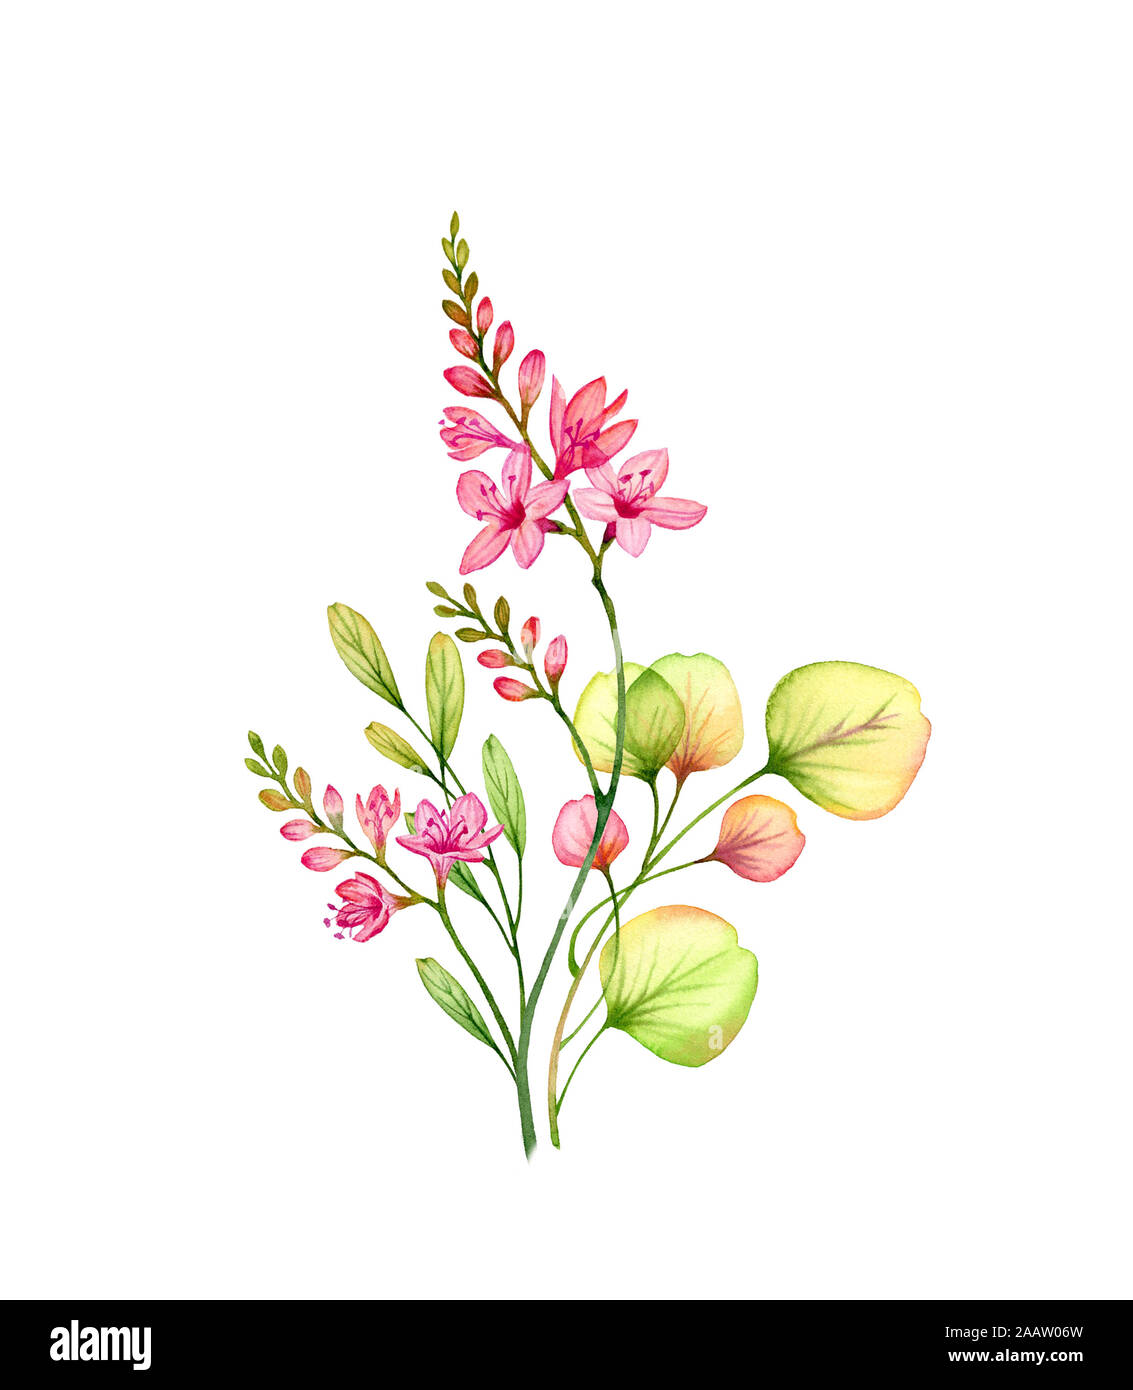 Watercolor transparent red freesia flowers and eucalyptus branch. Colourful tropical bouquet isolated on white. Botanical floral illustration for Stock Photo